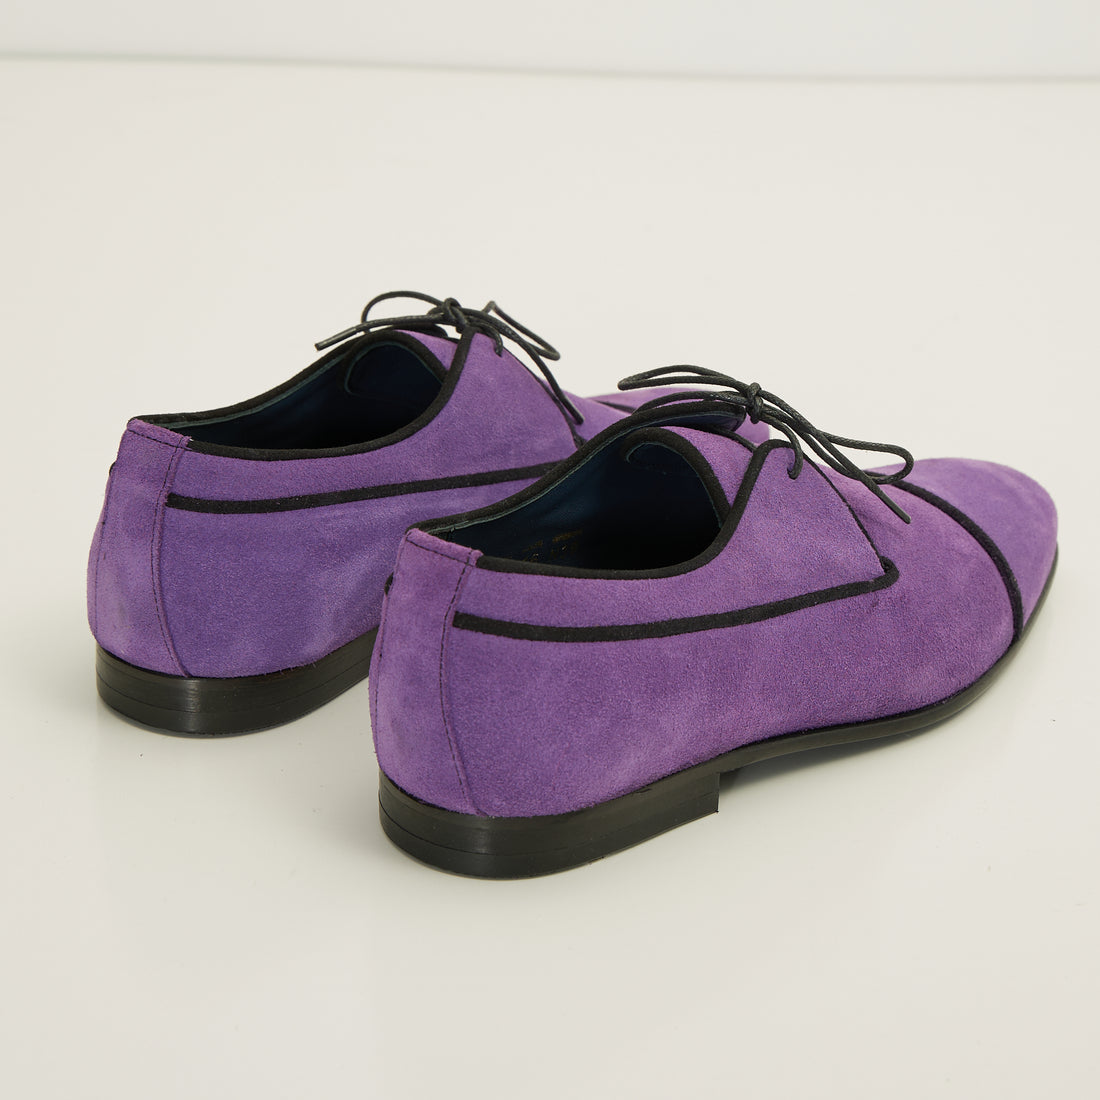 N° D1016 THE FORMAL LEATHER CAP TOE DERBY SHOES  - PURPLE SUEDE